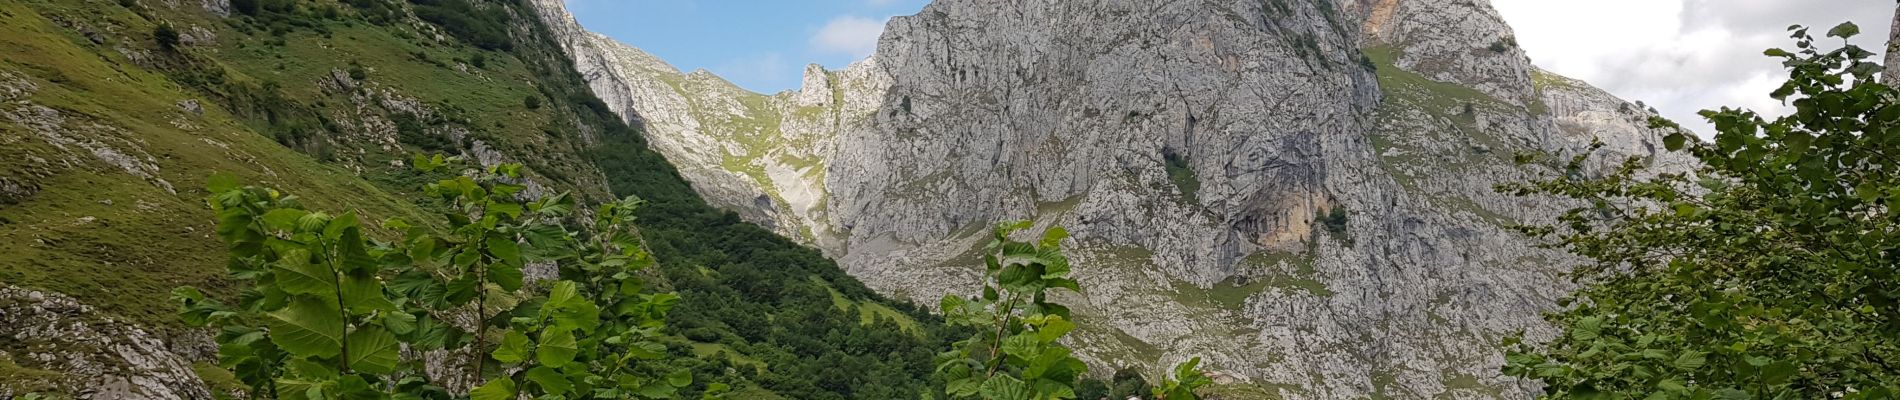 Tocht Stappen Cabrales - 2019 08 10 Poncebos Bulnes - Photo